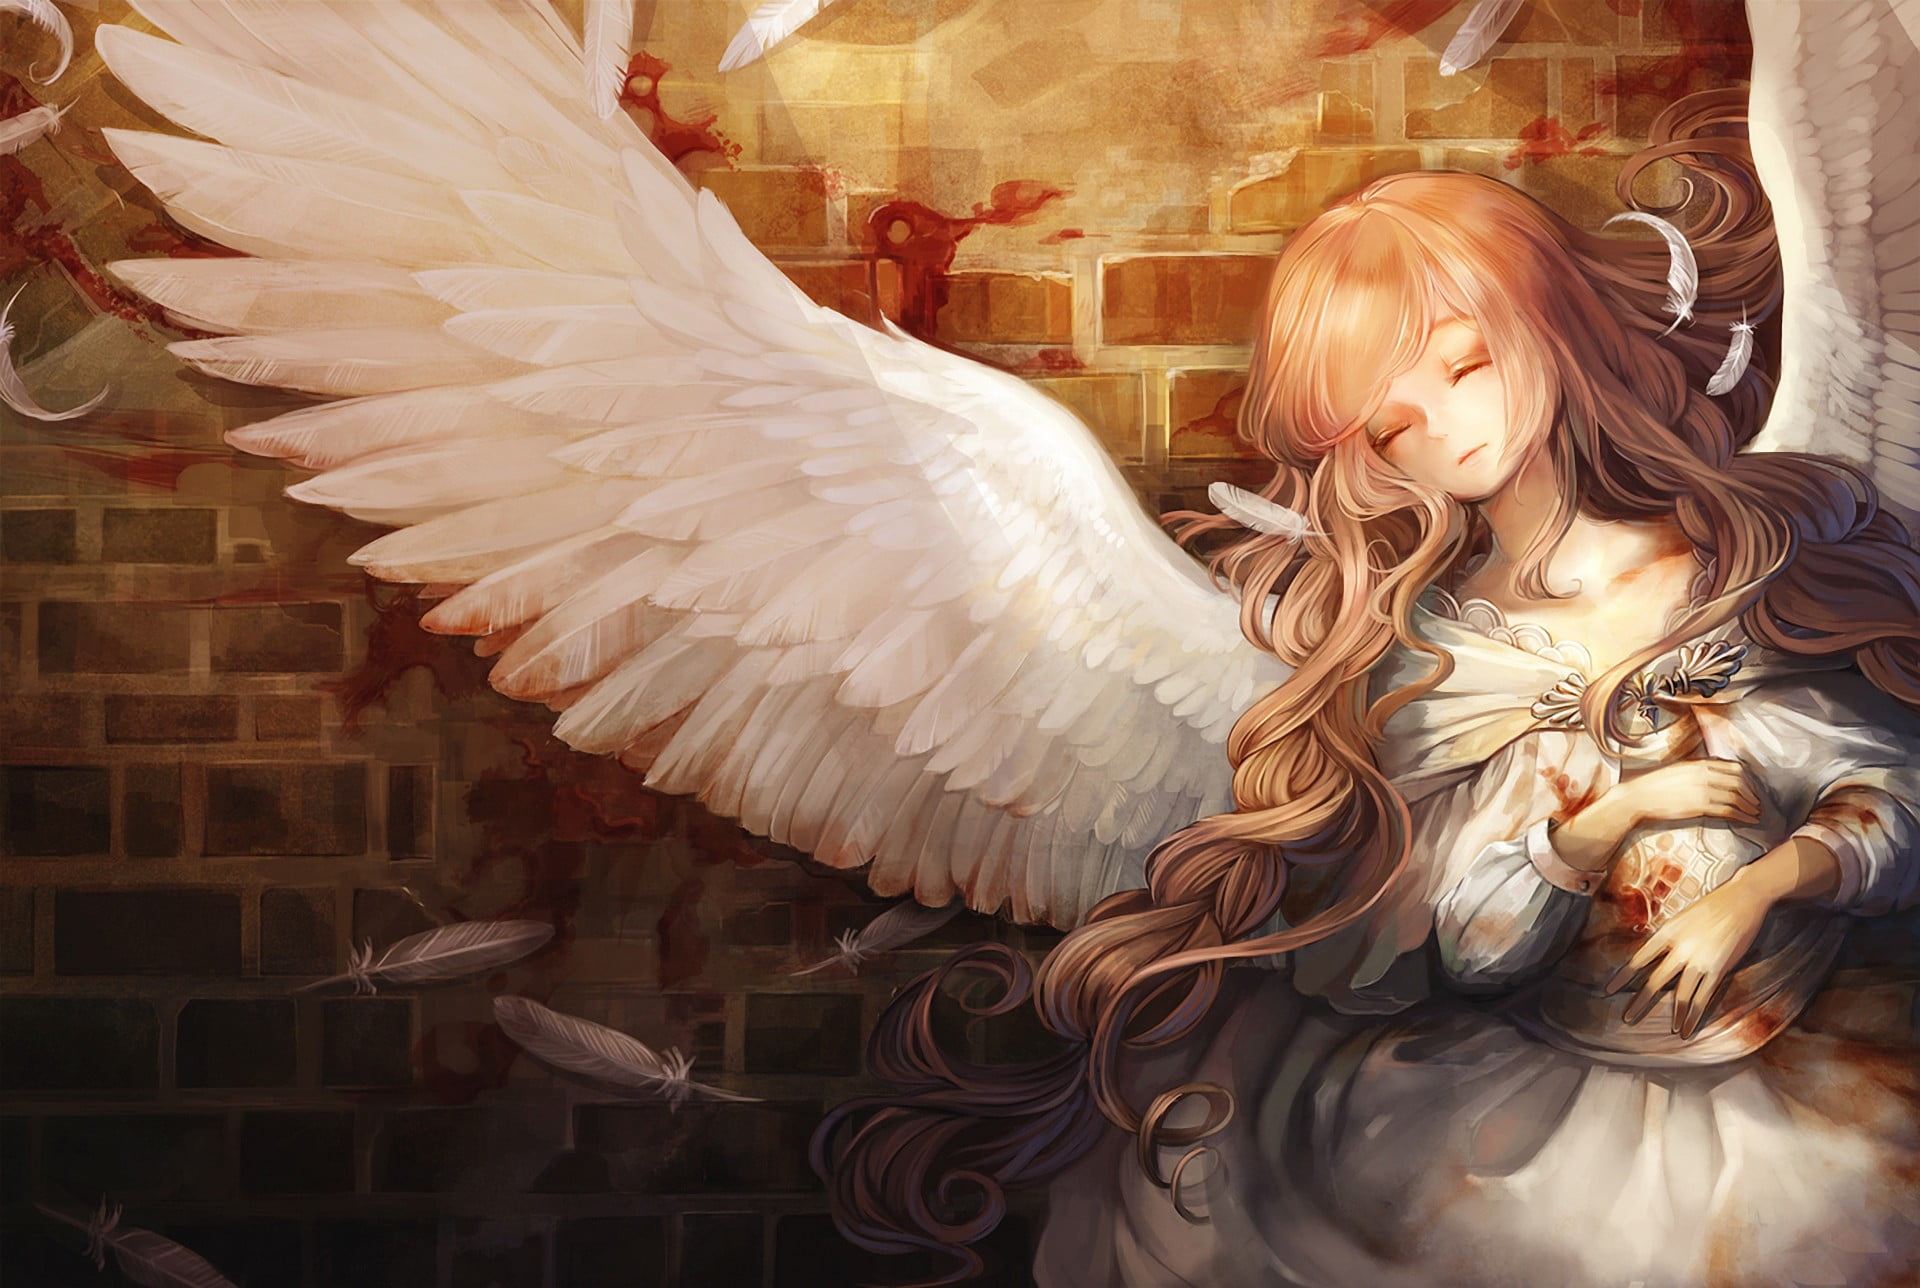 Wallpaper ID: 617352 / feathers, sky, light, 1080P, anime, clouds, art,  ange, reflection, winged, angel, character, female, water, wings, animated,  girl free download